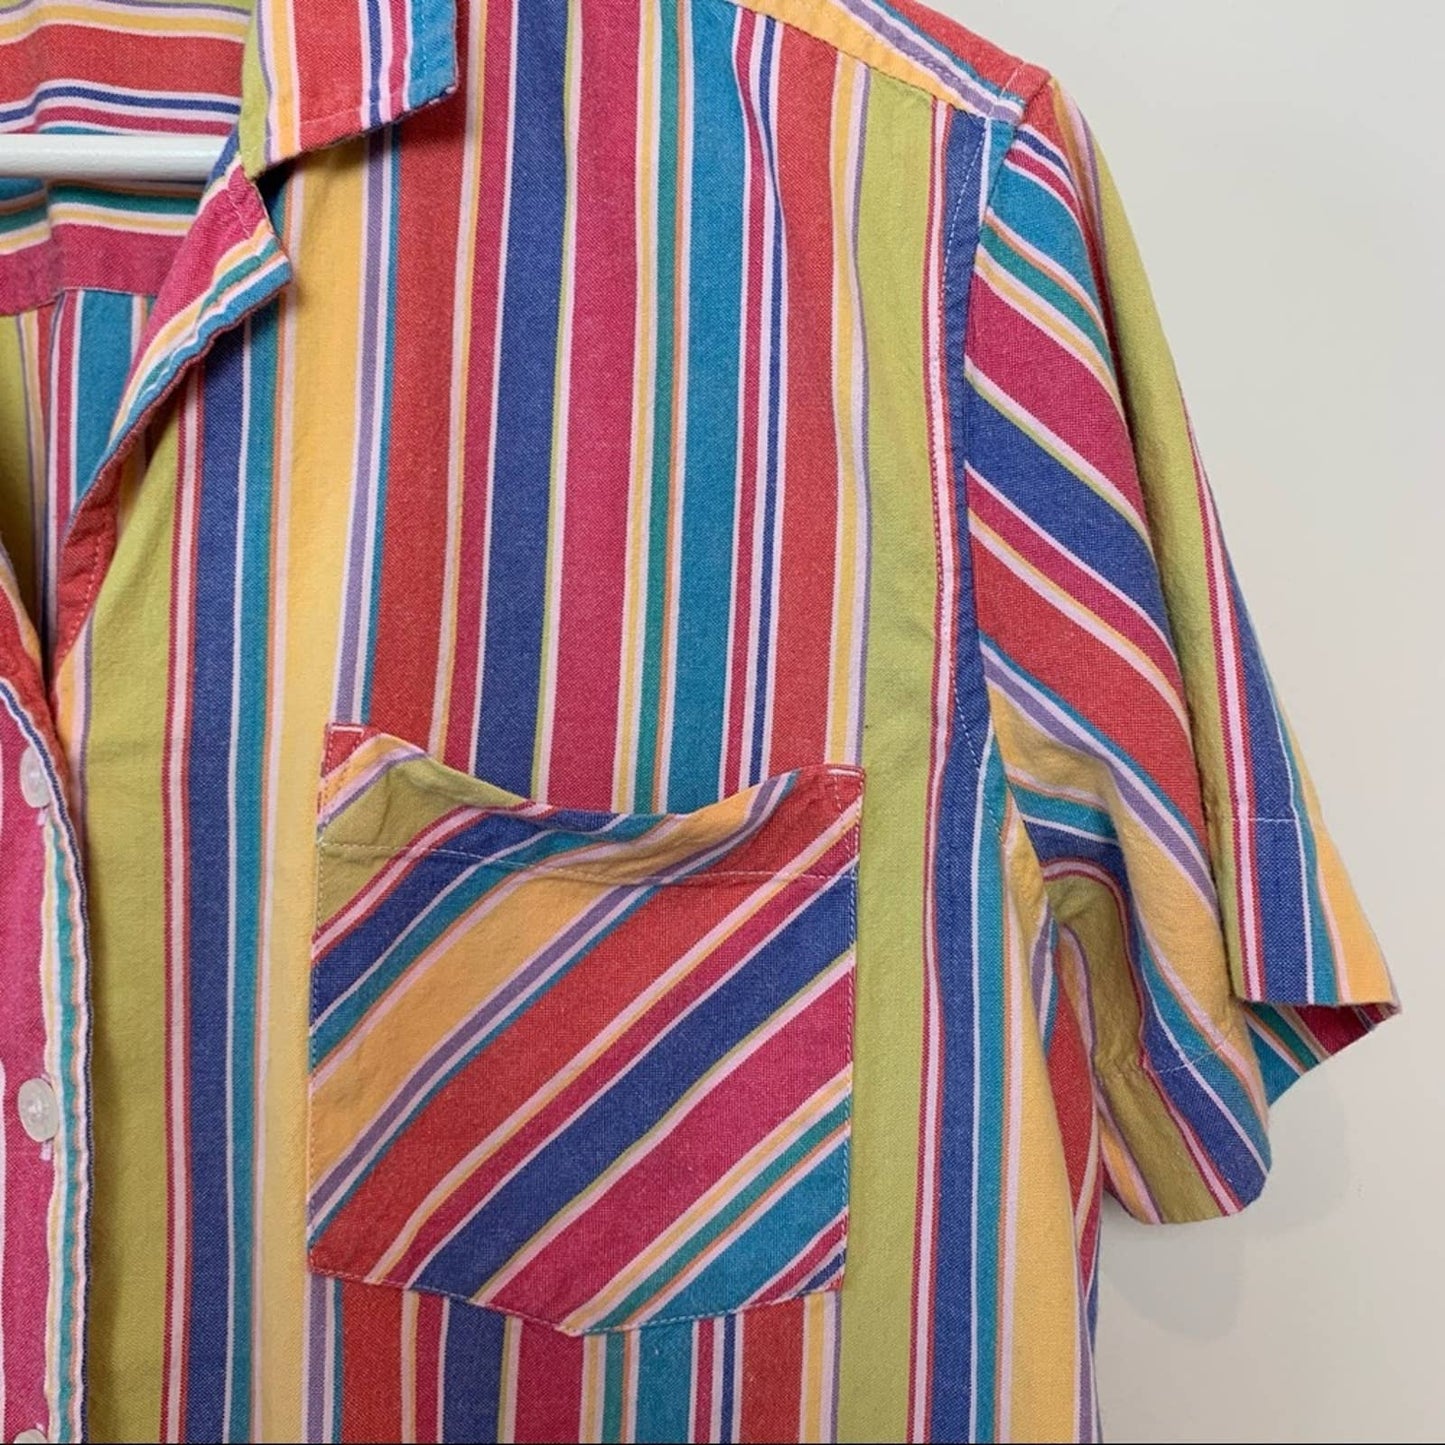 Vintage 90s Erika Rainbow Striped Short Sleeve Button Down Collared Shirt Large